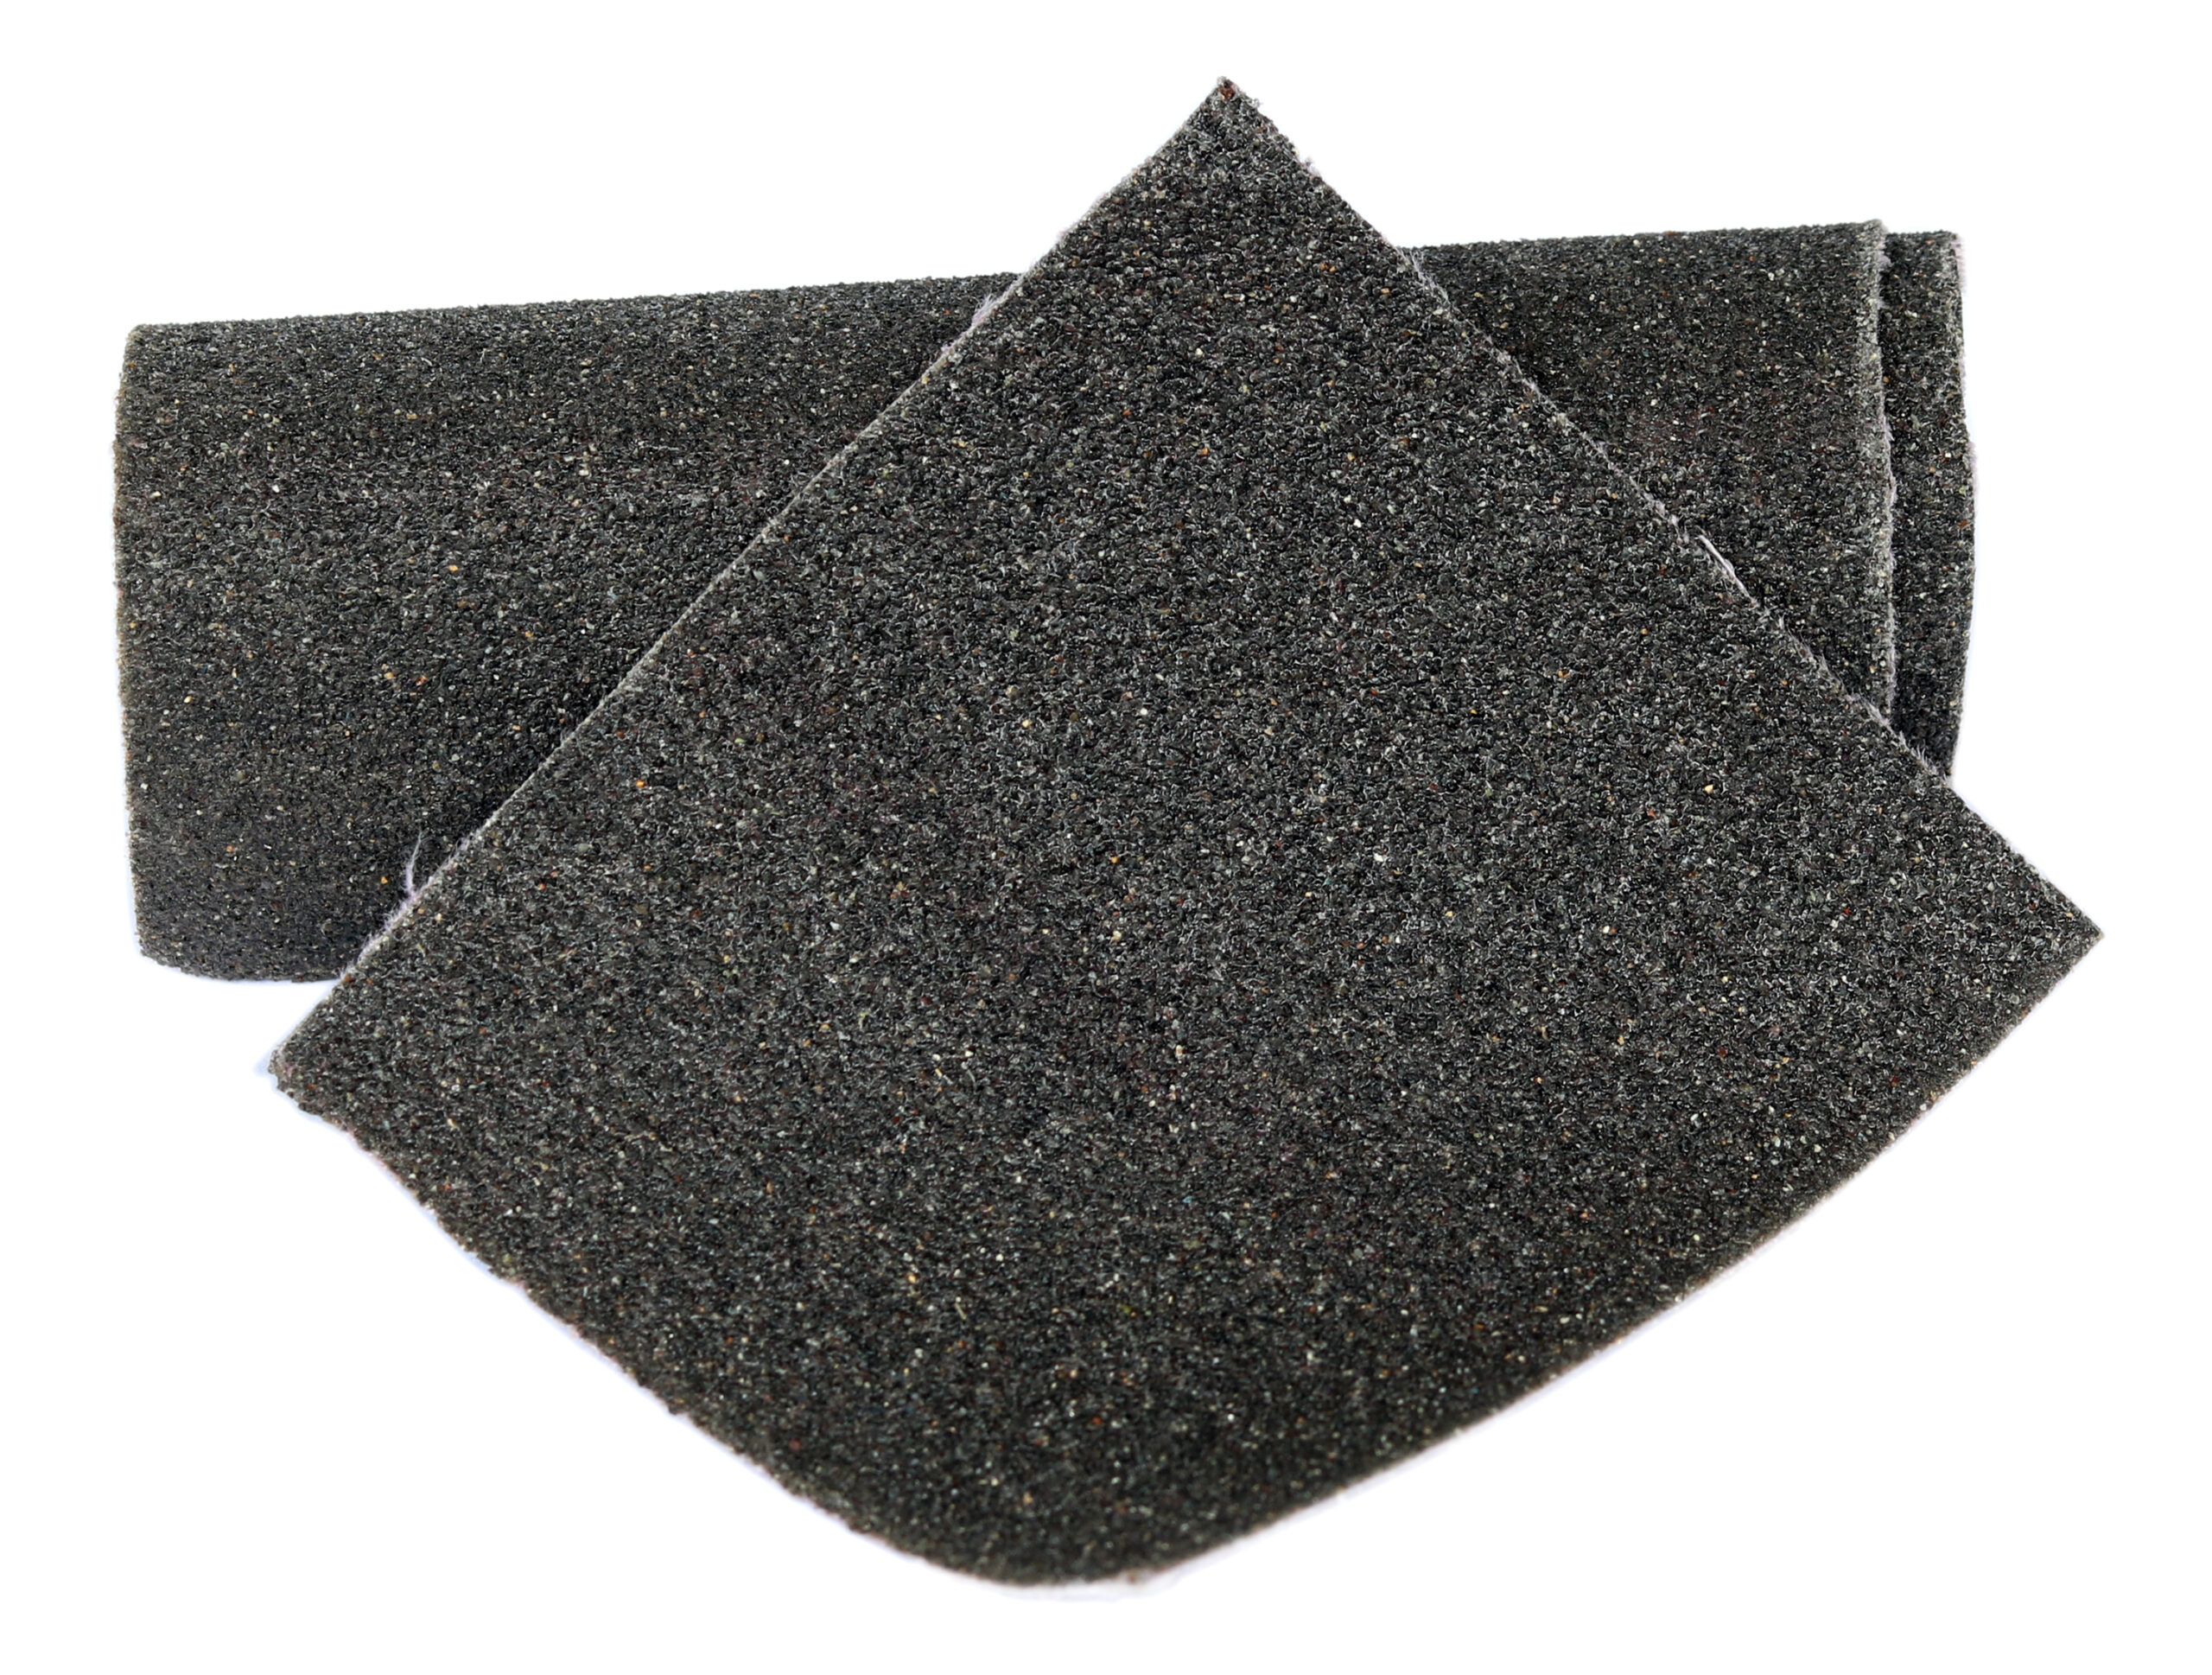 Global Carbon Felt and Graphite Felt Market Size Set To Cross $17.1 Bn By  2030